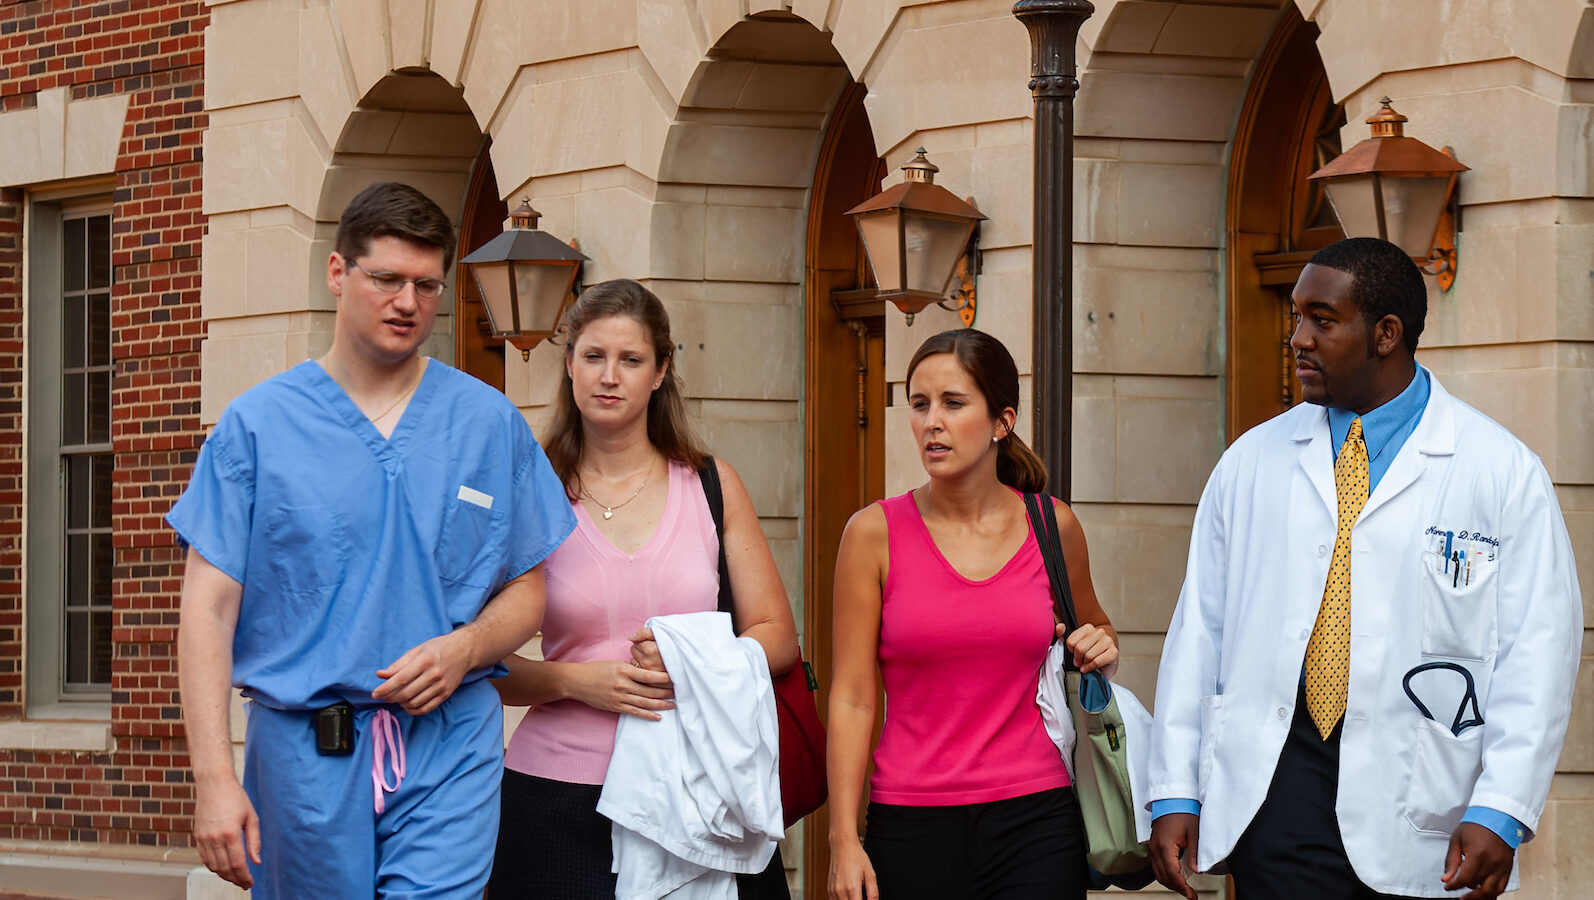 healthcare workers and business people walking side by side